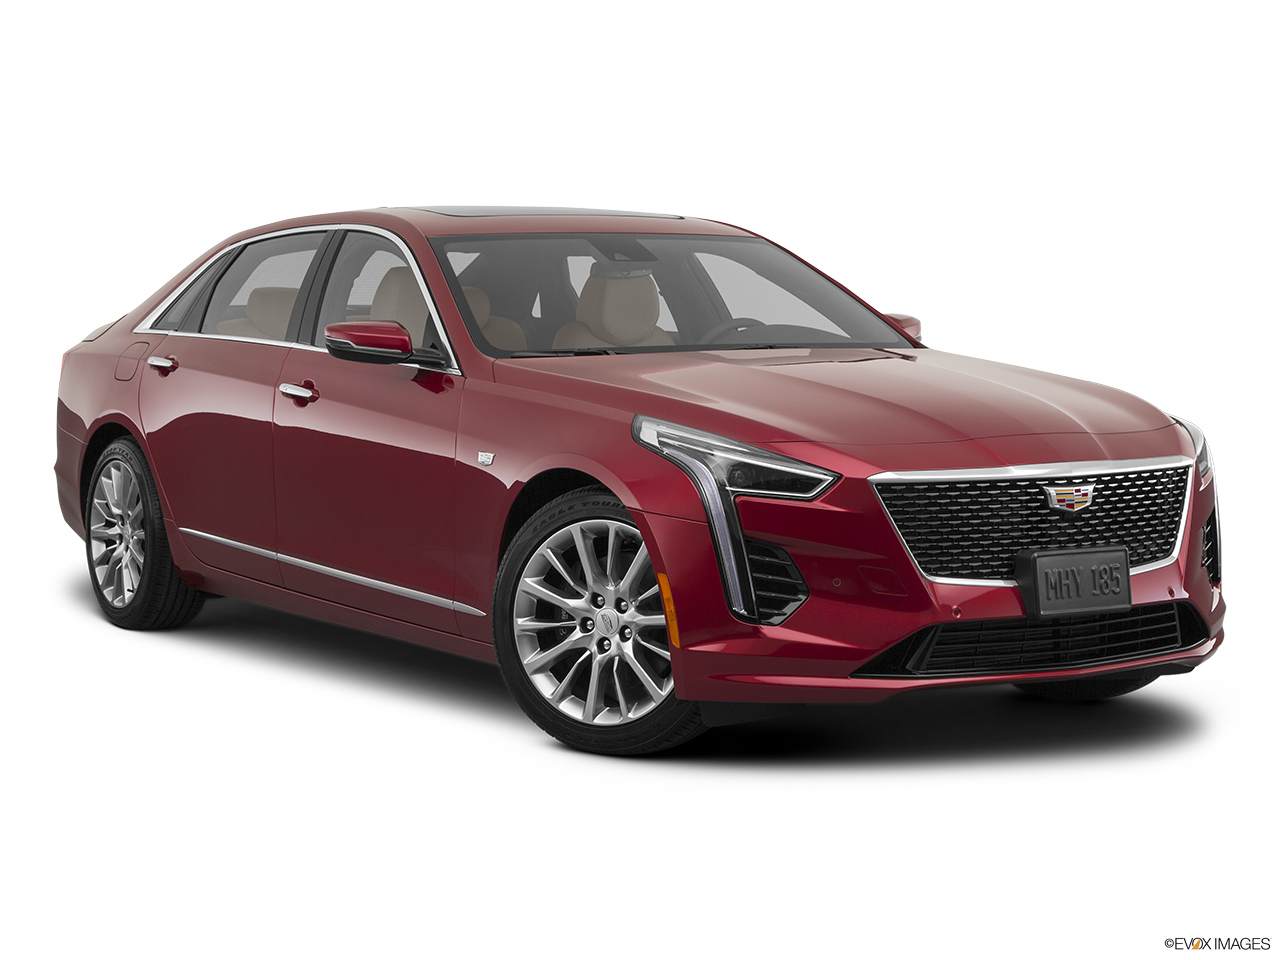 2020 Cadillac CT6 Luxury Front passenger 3/4 w/ wheels turned. 